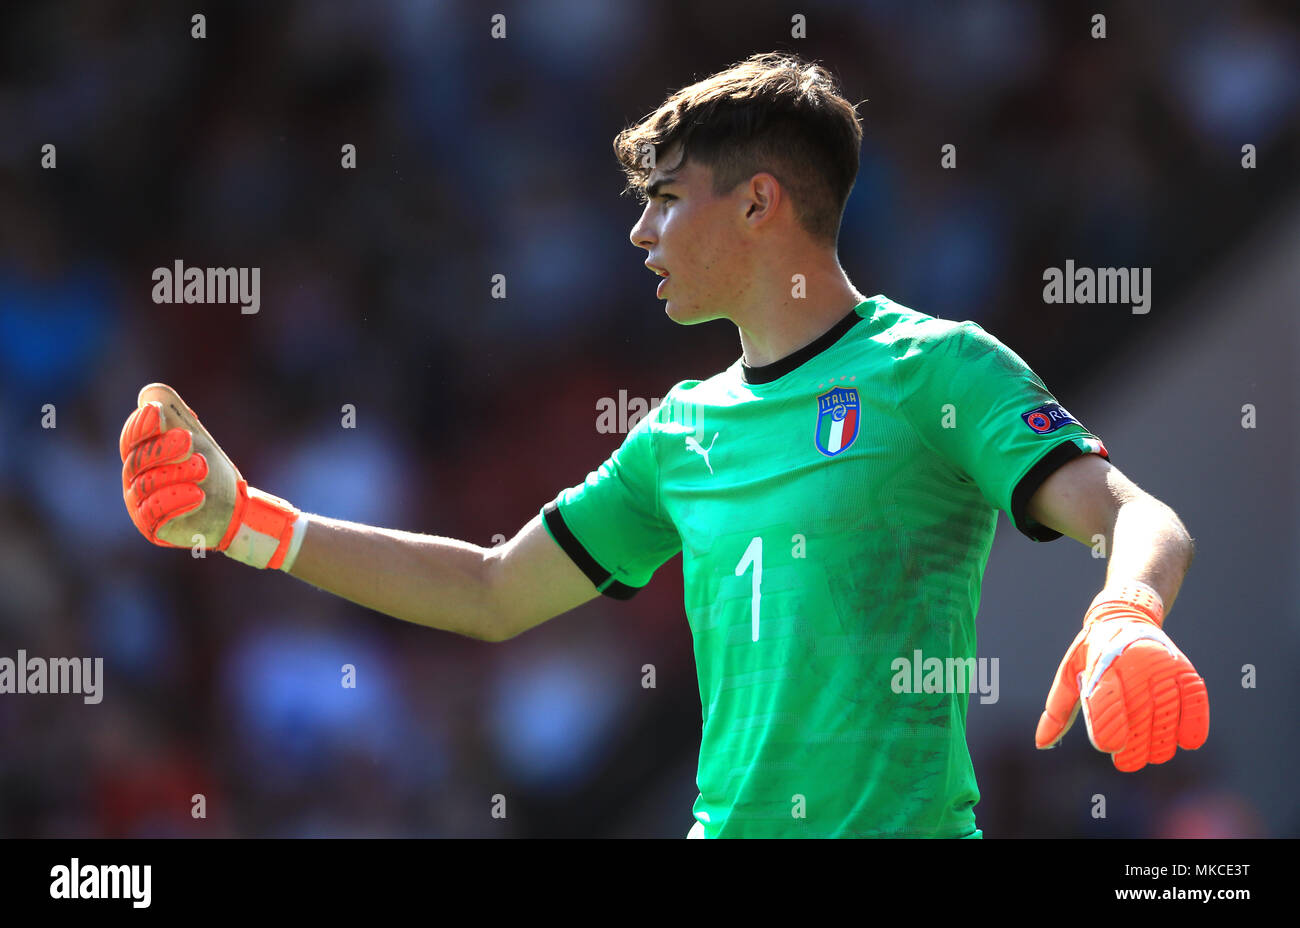 Italy U17 goalkeeper Alessandro Russo during the UEFA European U17 Championship, Group A match at Banks's Stadium, Walsall. PRESS ASSOCIATION Photo. Picture date: Monday May 7, 2018. See PA story SOCCER England U17. Photo credit should read: Mike Egerton/PA Wire. Stock Photo